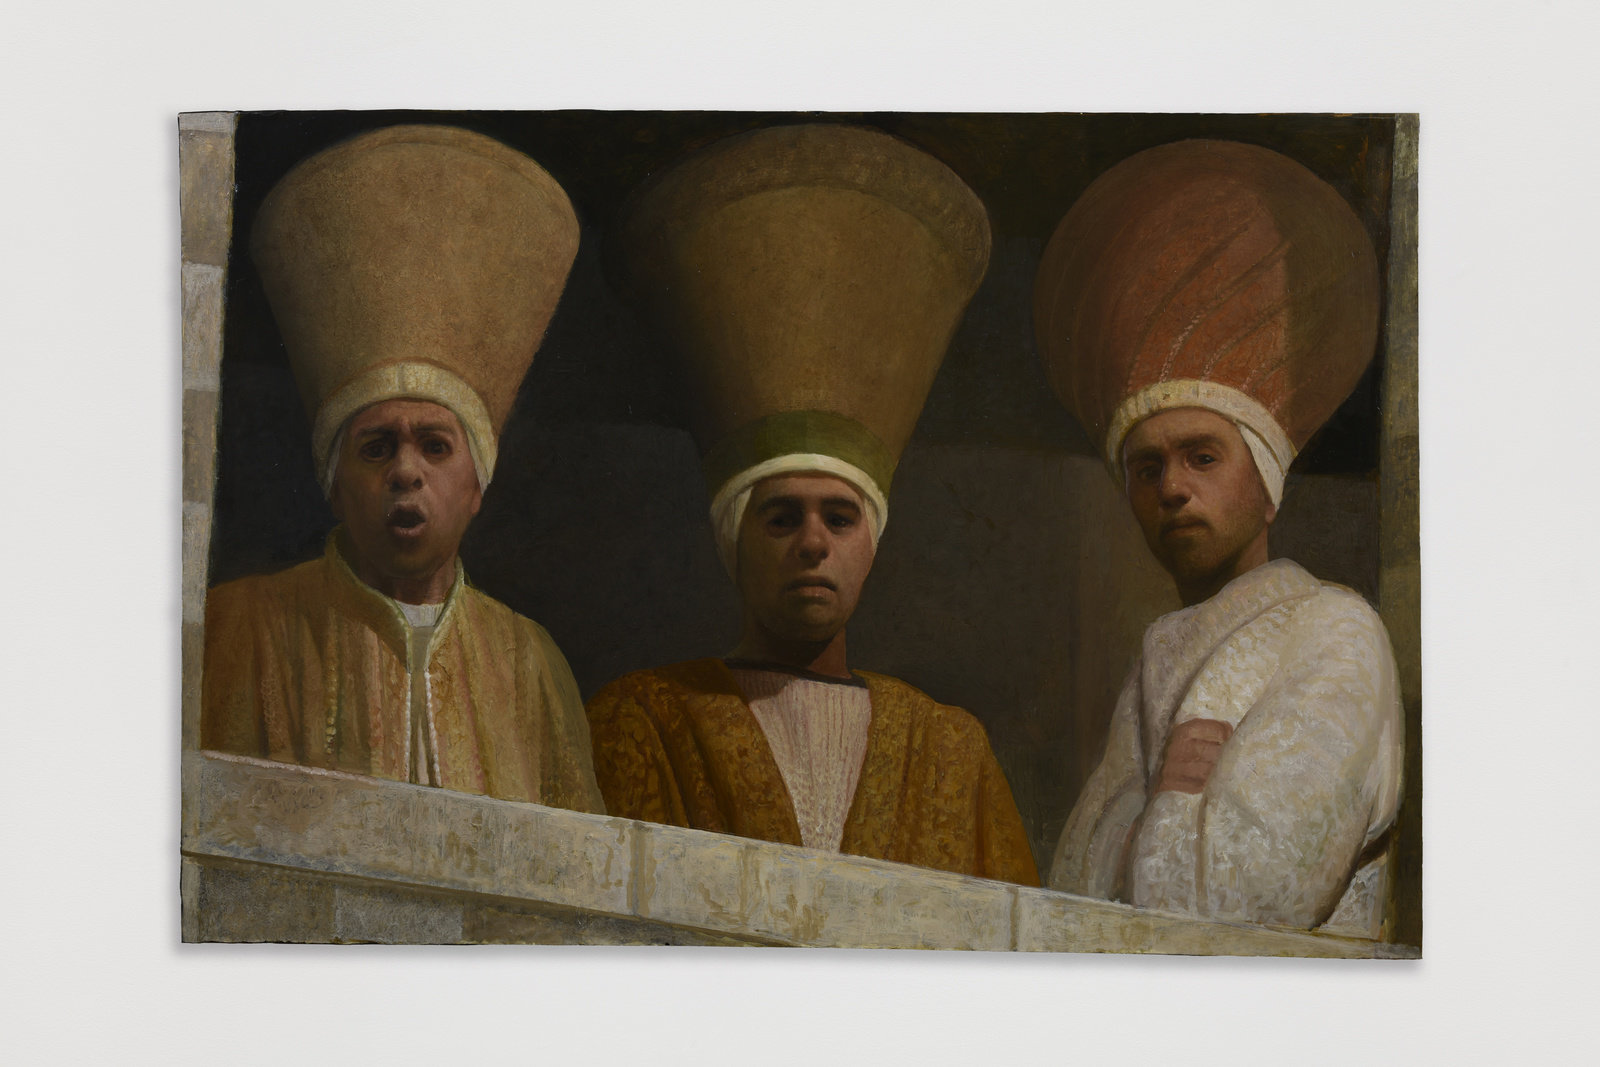 An oil on canvas painting by Vincent Desiderio of three men in ecclesiastic garb peering out from a window. The three men are depicted wearing large inverted cone headdresses rendered in white and clay hues.